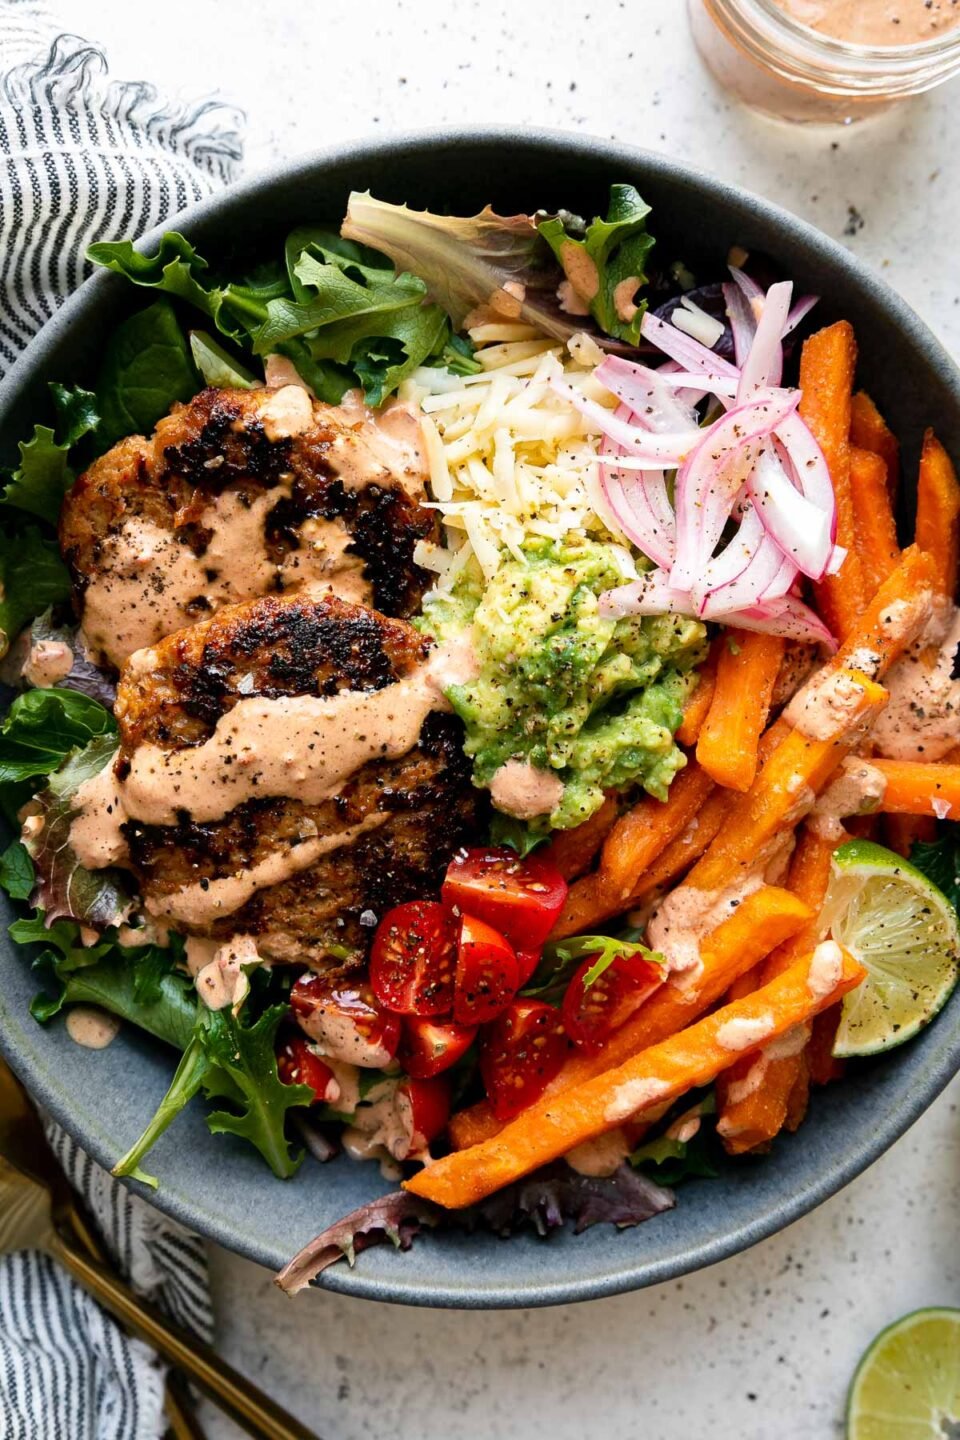 An assembled serving of Chipotle Turkey Burger Bowls with Sweet Potato Fries fills a blue ceramic bowl. The turkey burgers are nestled atop a bed of greens with baked Alexia Sweet Potato Fries, smashed avocado, pickled red onions, quartered cherry tomatoes, shredded cheese, a lime wedge and chipotle lime crema drizzled over top. The bowl sits atop a creamy white textured surface with a small jar of chipotle lime crema, two lime wedges, a blue and white striped linen napkin and a set of gold silverware surrounding the bowl.